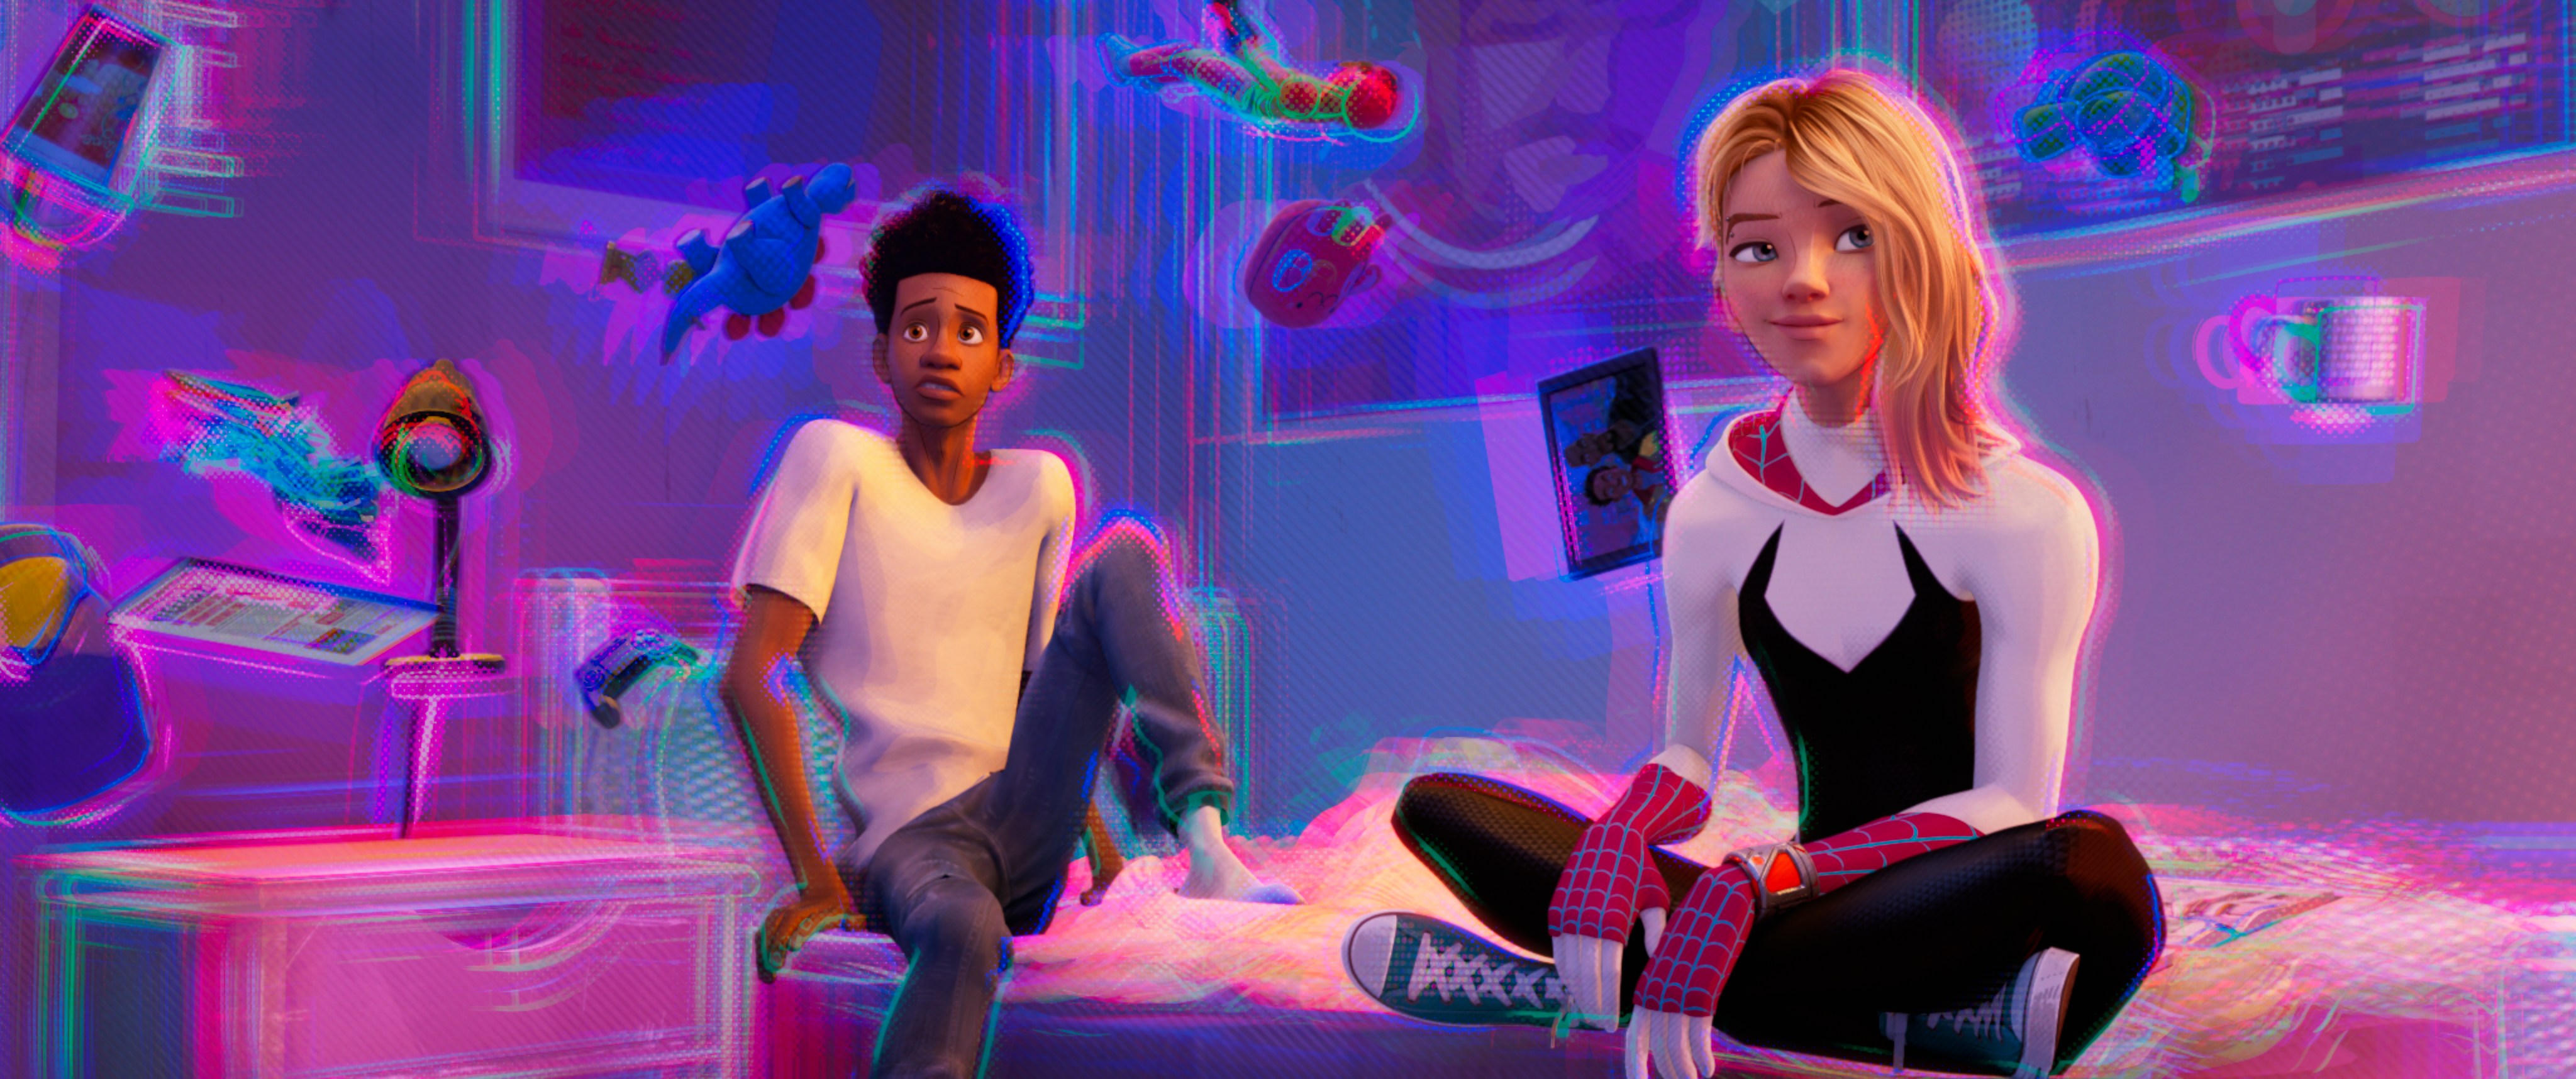 Miles Morales (Shameik Moore) and Gwen Stacy (Hailee Steinfeld) in Spider-Man™: Across the Spider-Verse (Part One).  (Sony Pictures Animation)